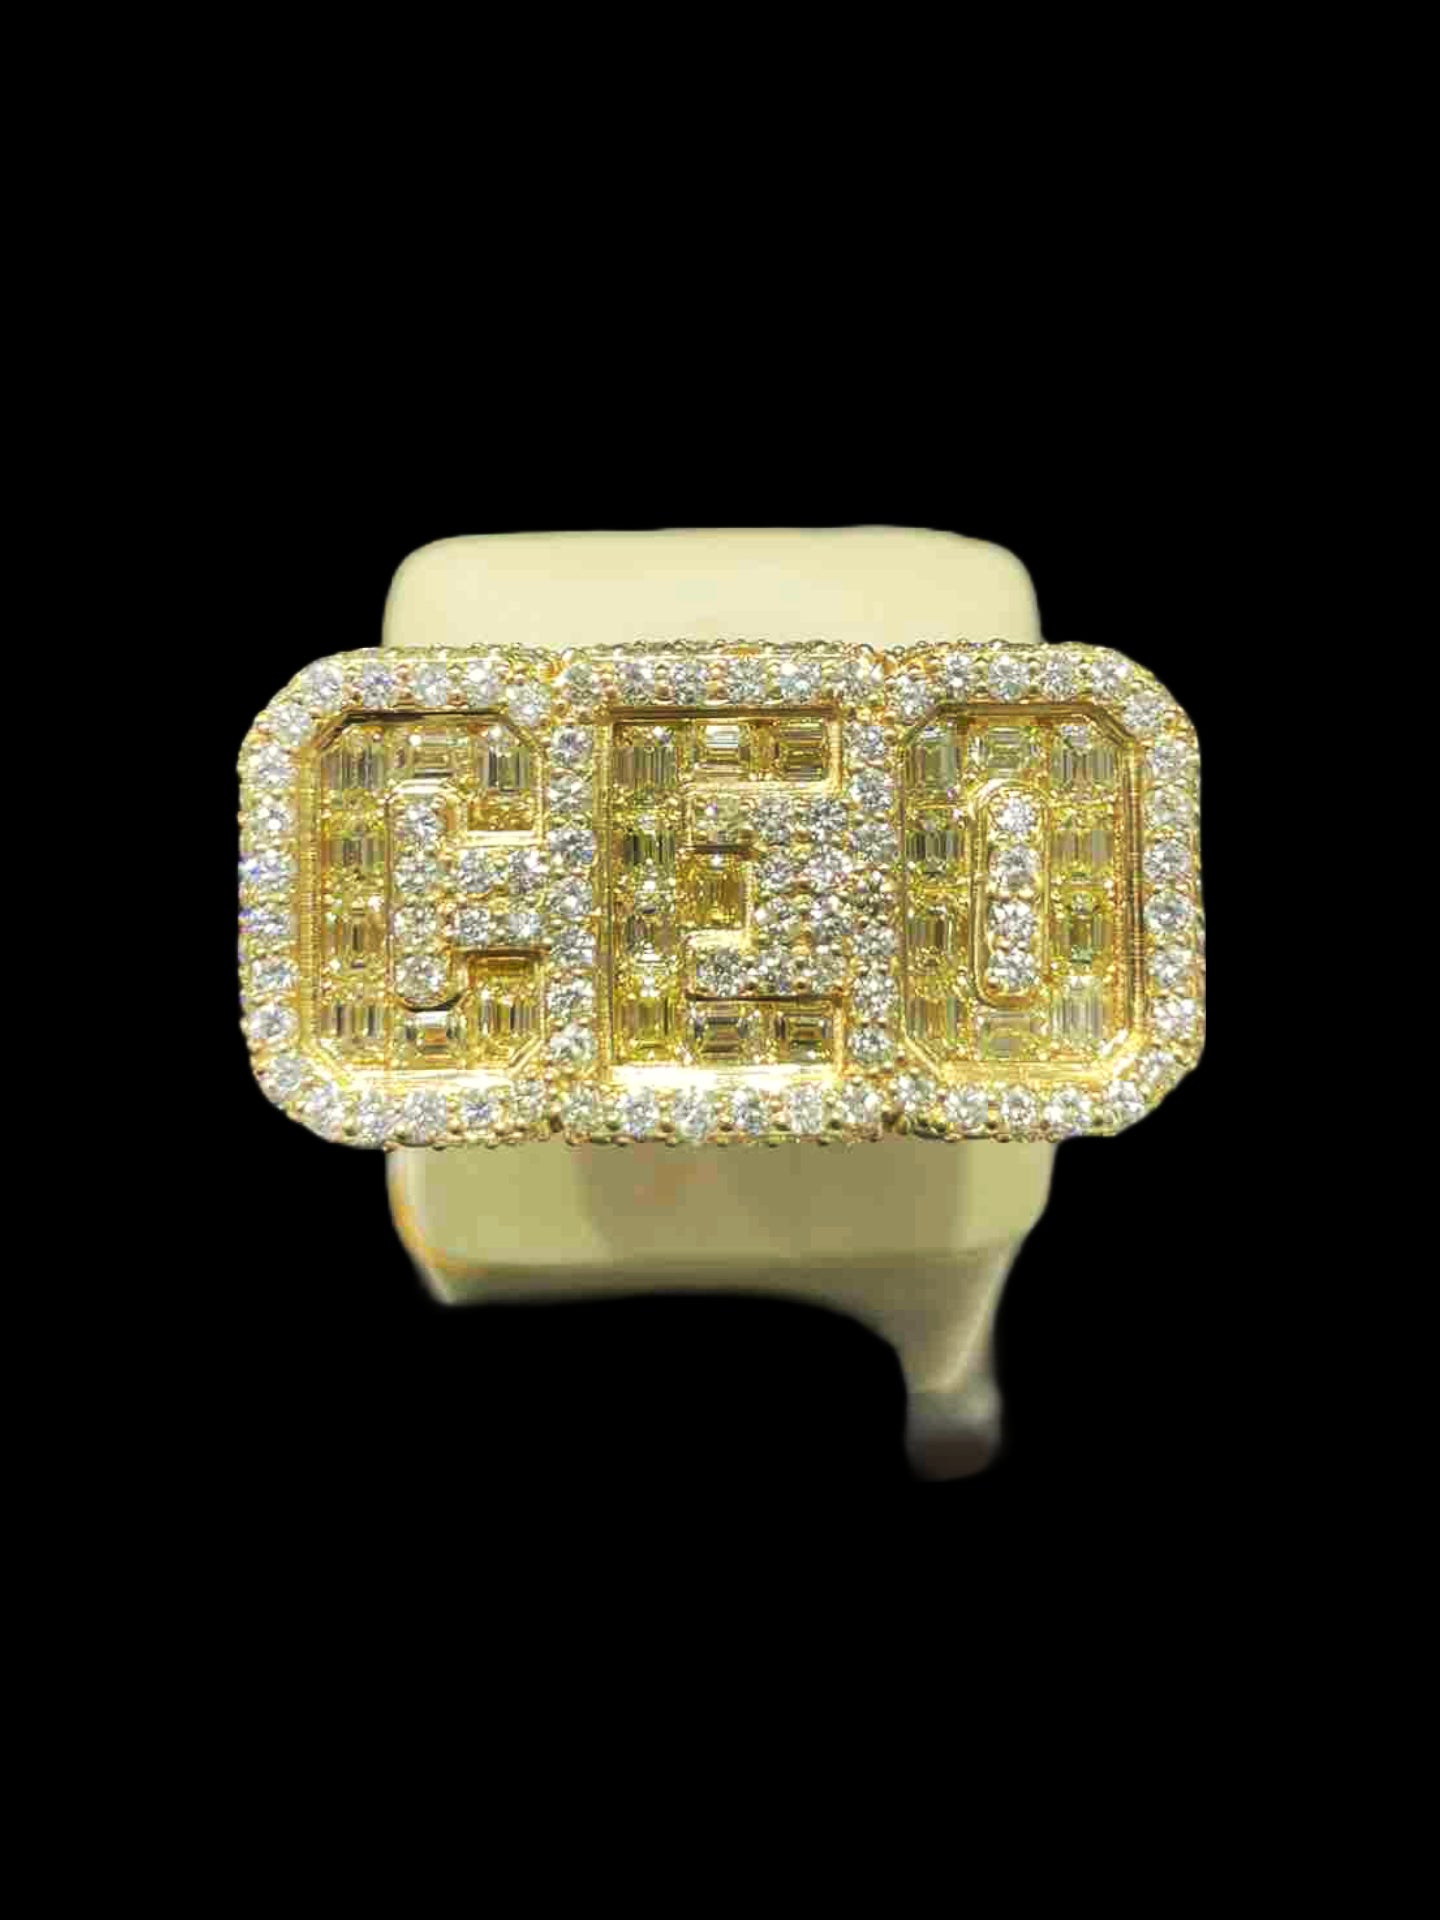 iced out ceo ring bust down ring with vvs1 natural diamonds 14k gold 55 grams and 17 cts t.w. 